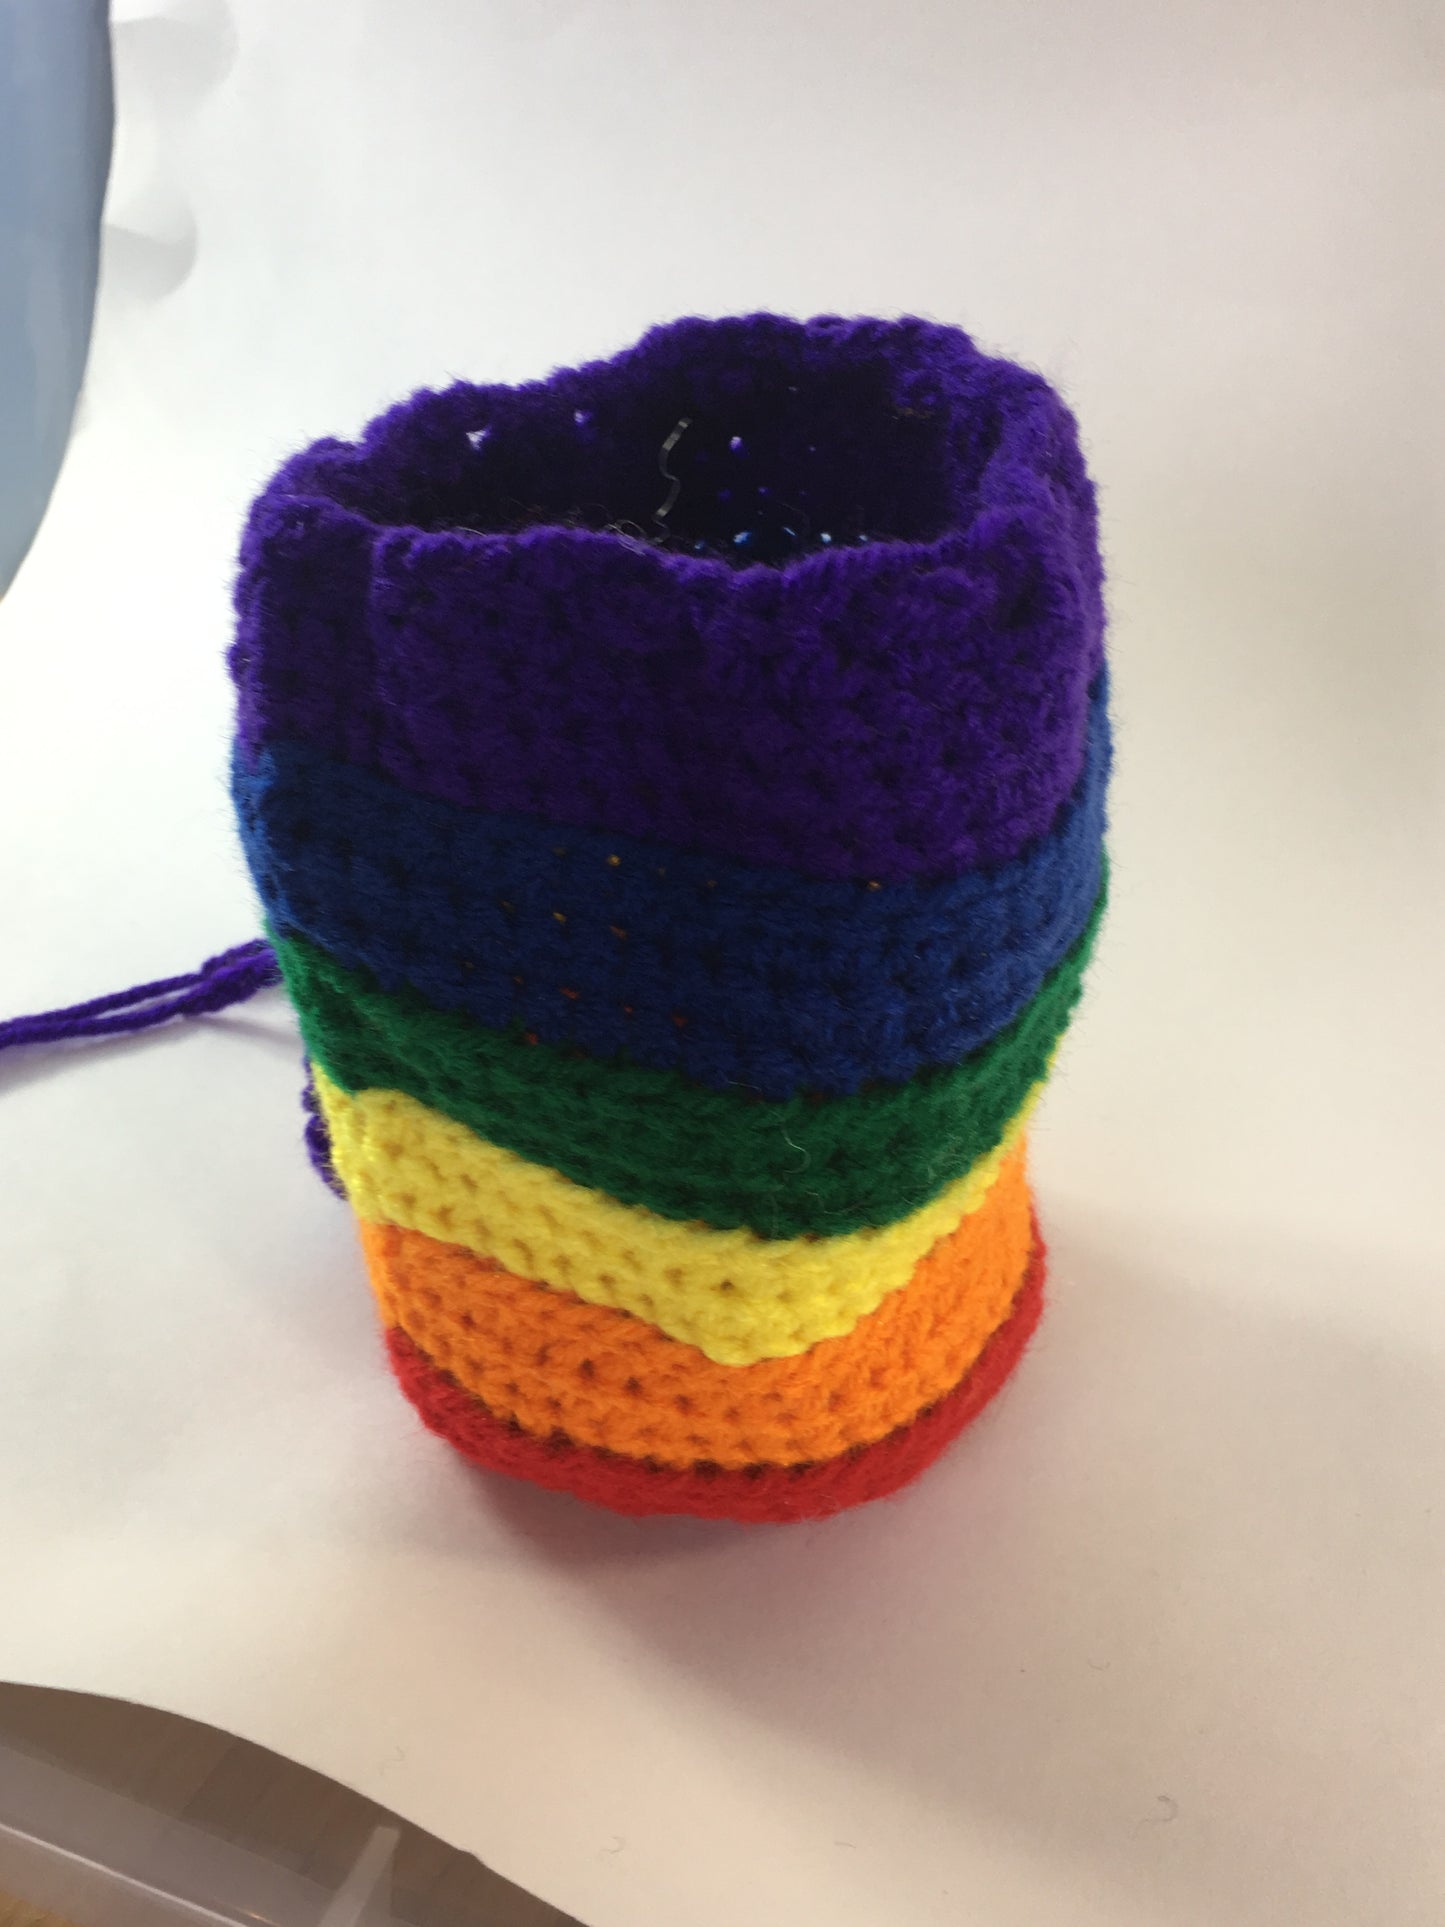 Rainbow Gay Pride D&D Pathfinder Tabletop Game Dice Drawstring Crochet Dungeons and Dragons Bag Pouch